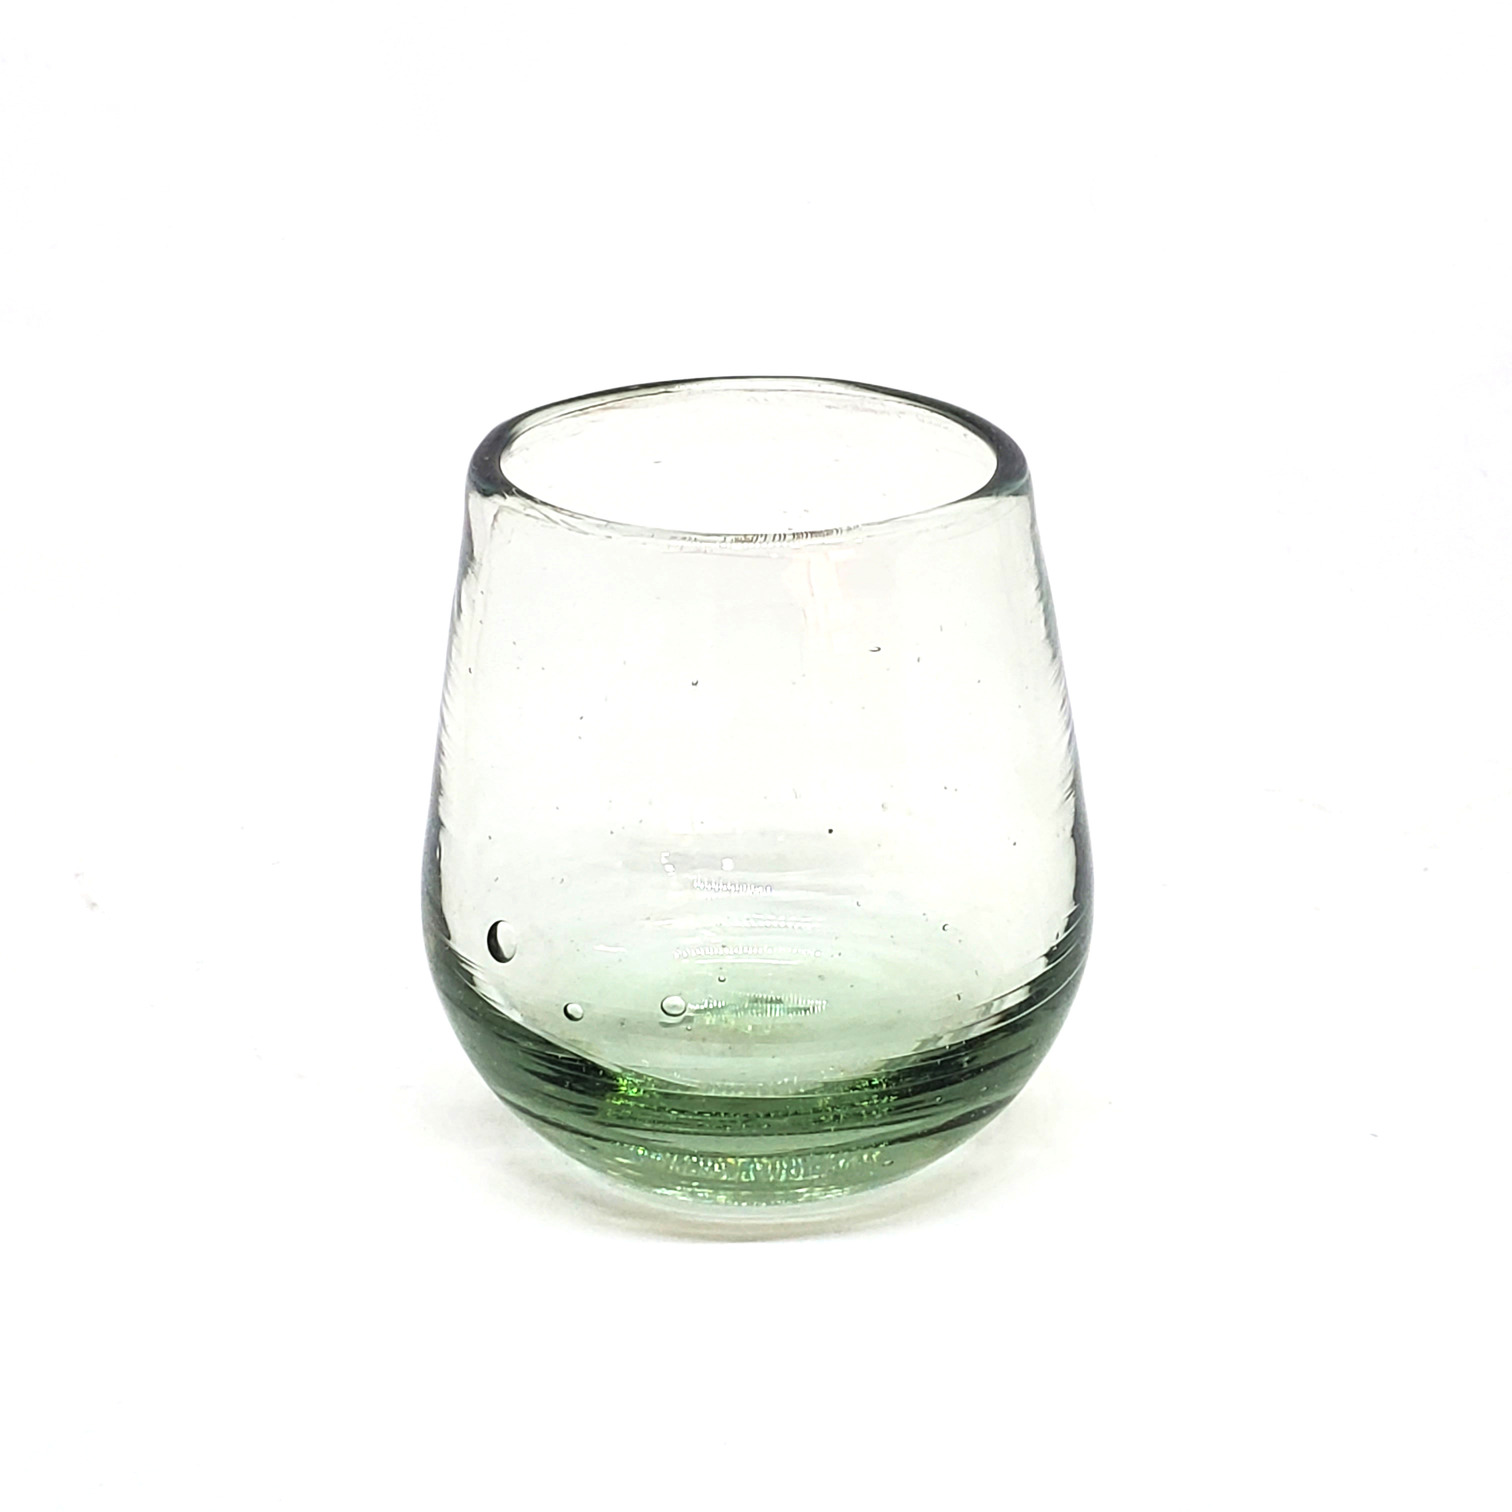 Wholesale Colored Glassware / Clear Roly Poly Glasses  / Our Clear Blown Glasses are individually handcrafted from recycled glass, making each of them unique works of art.